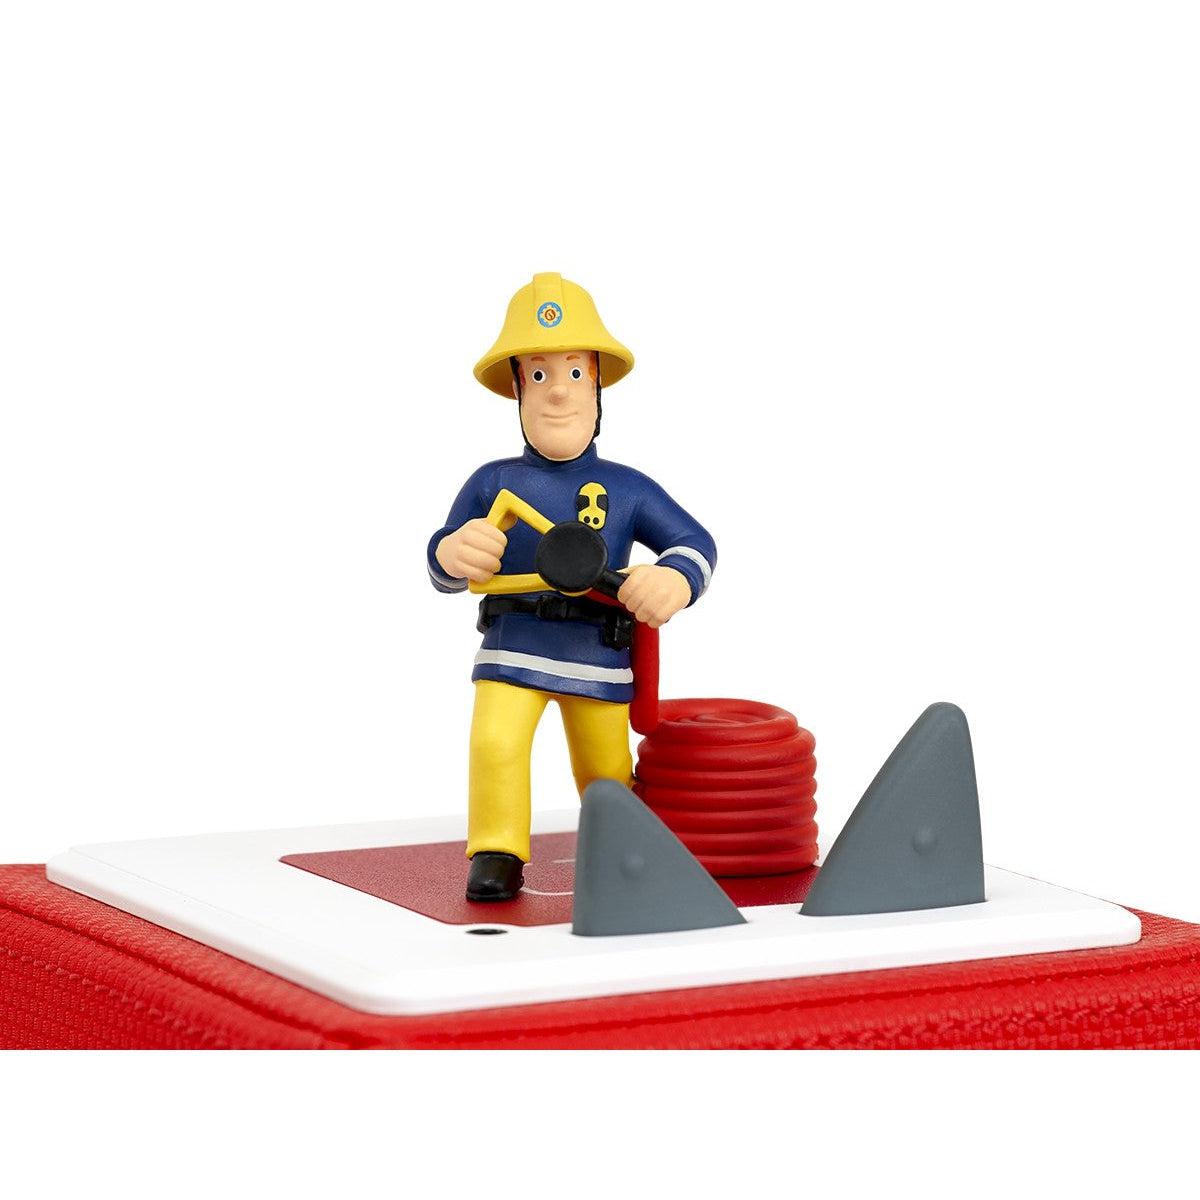 Tonies Fireman Sam - The Pontypandy Pack - Audio Character for use with Toniebox Player